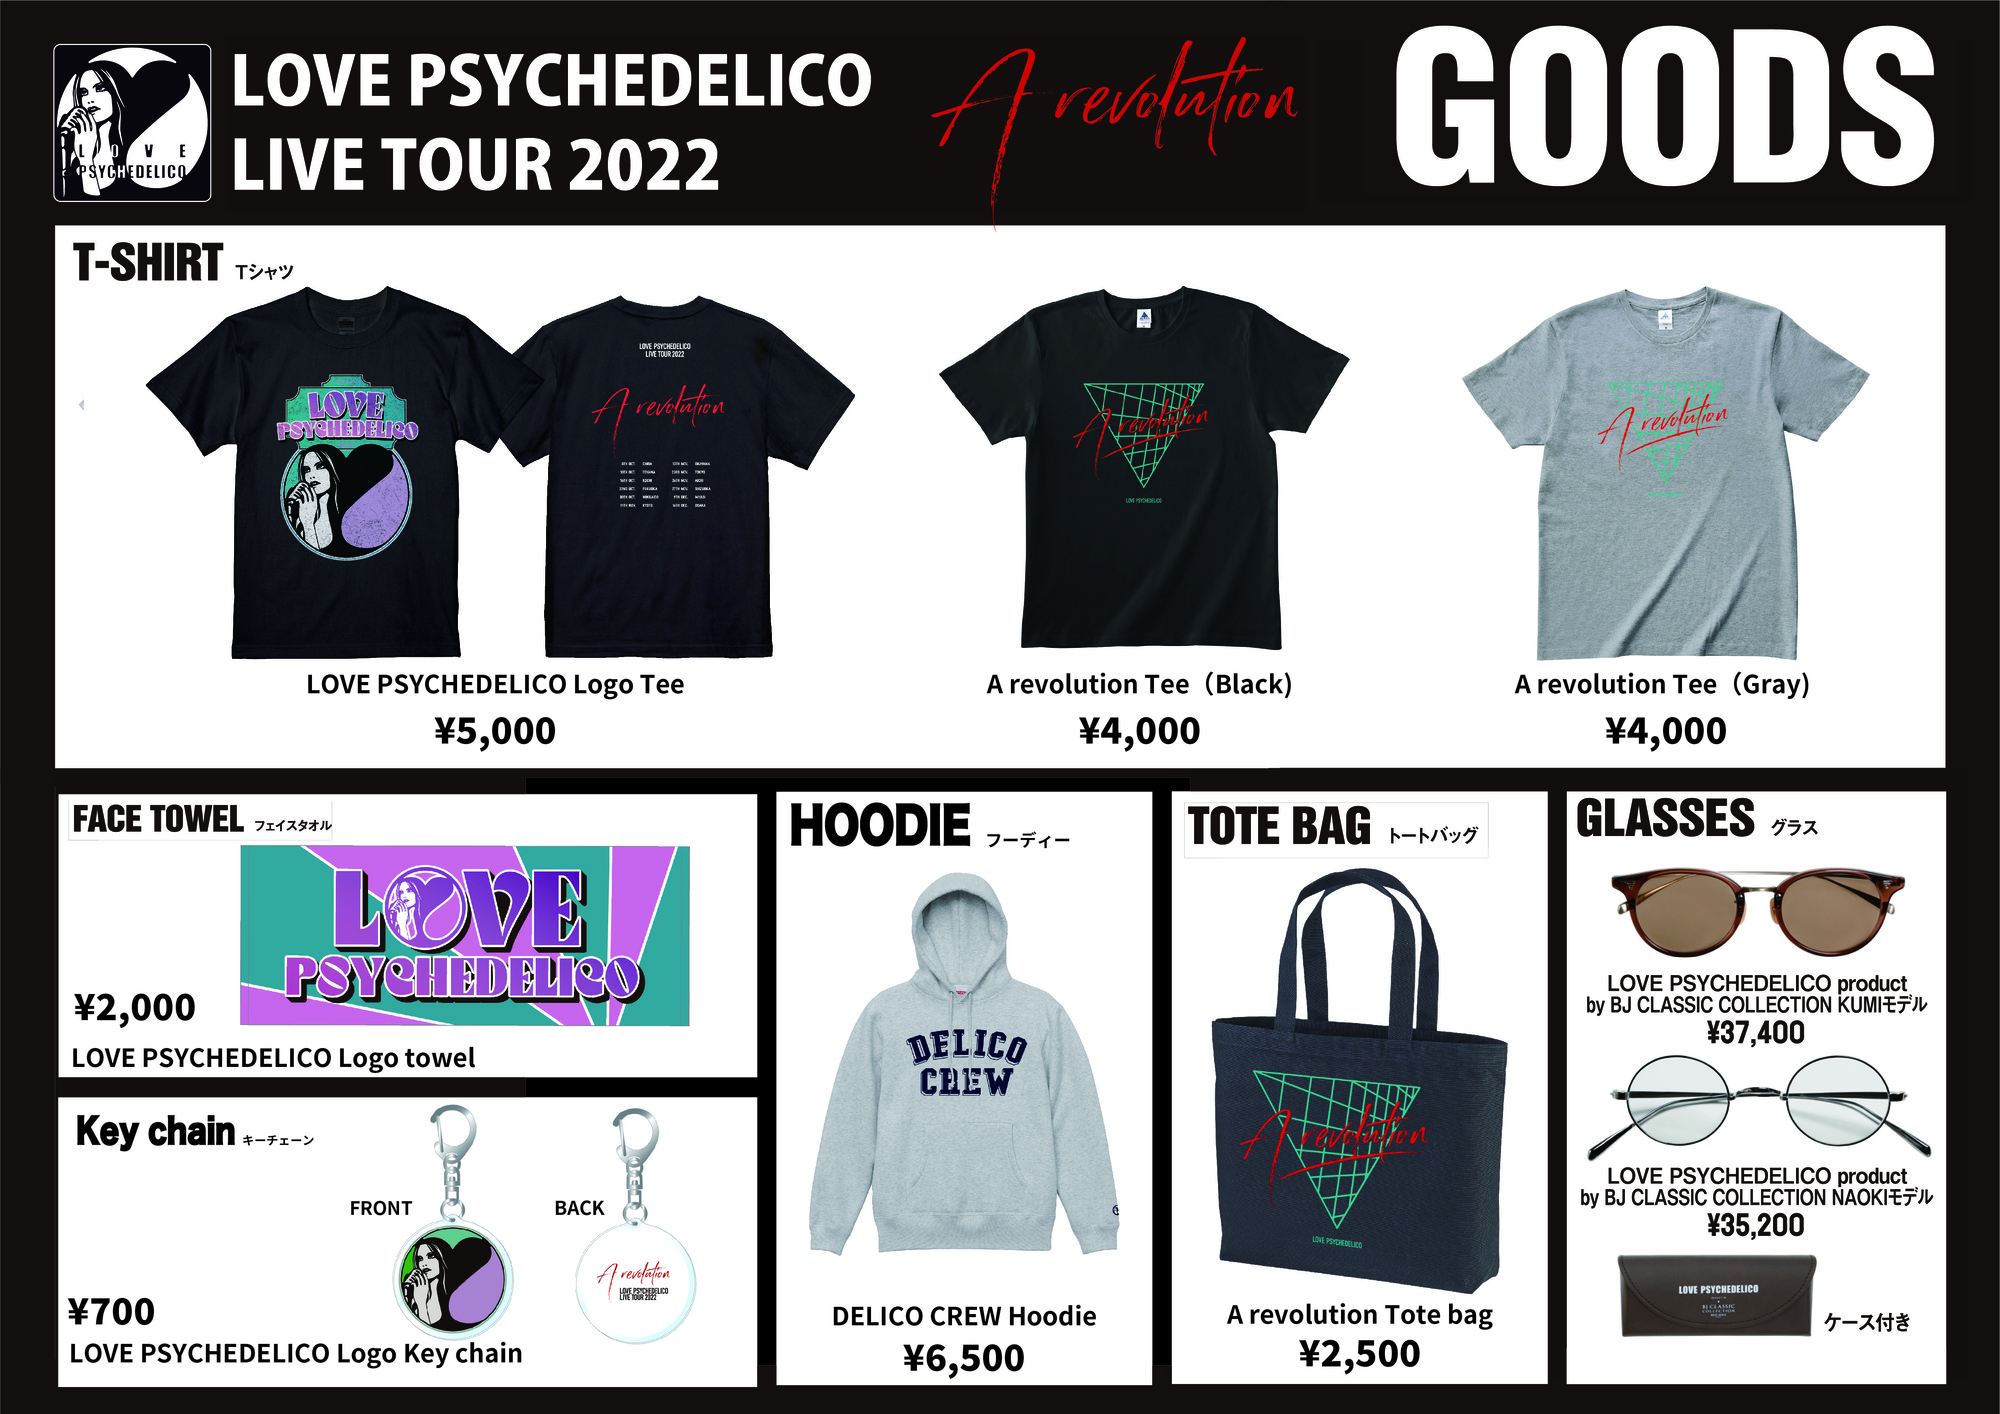 LOVE PSYCHEDELICO Live Tour 2022 